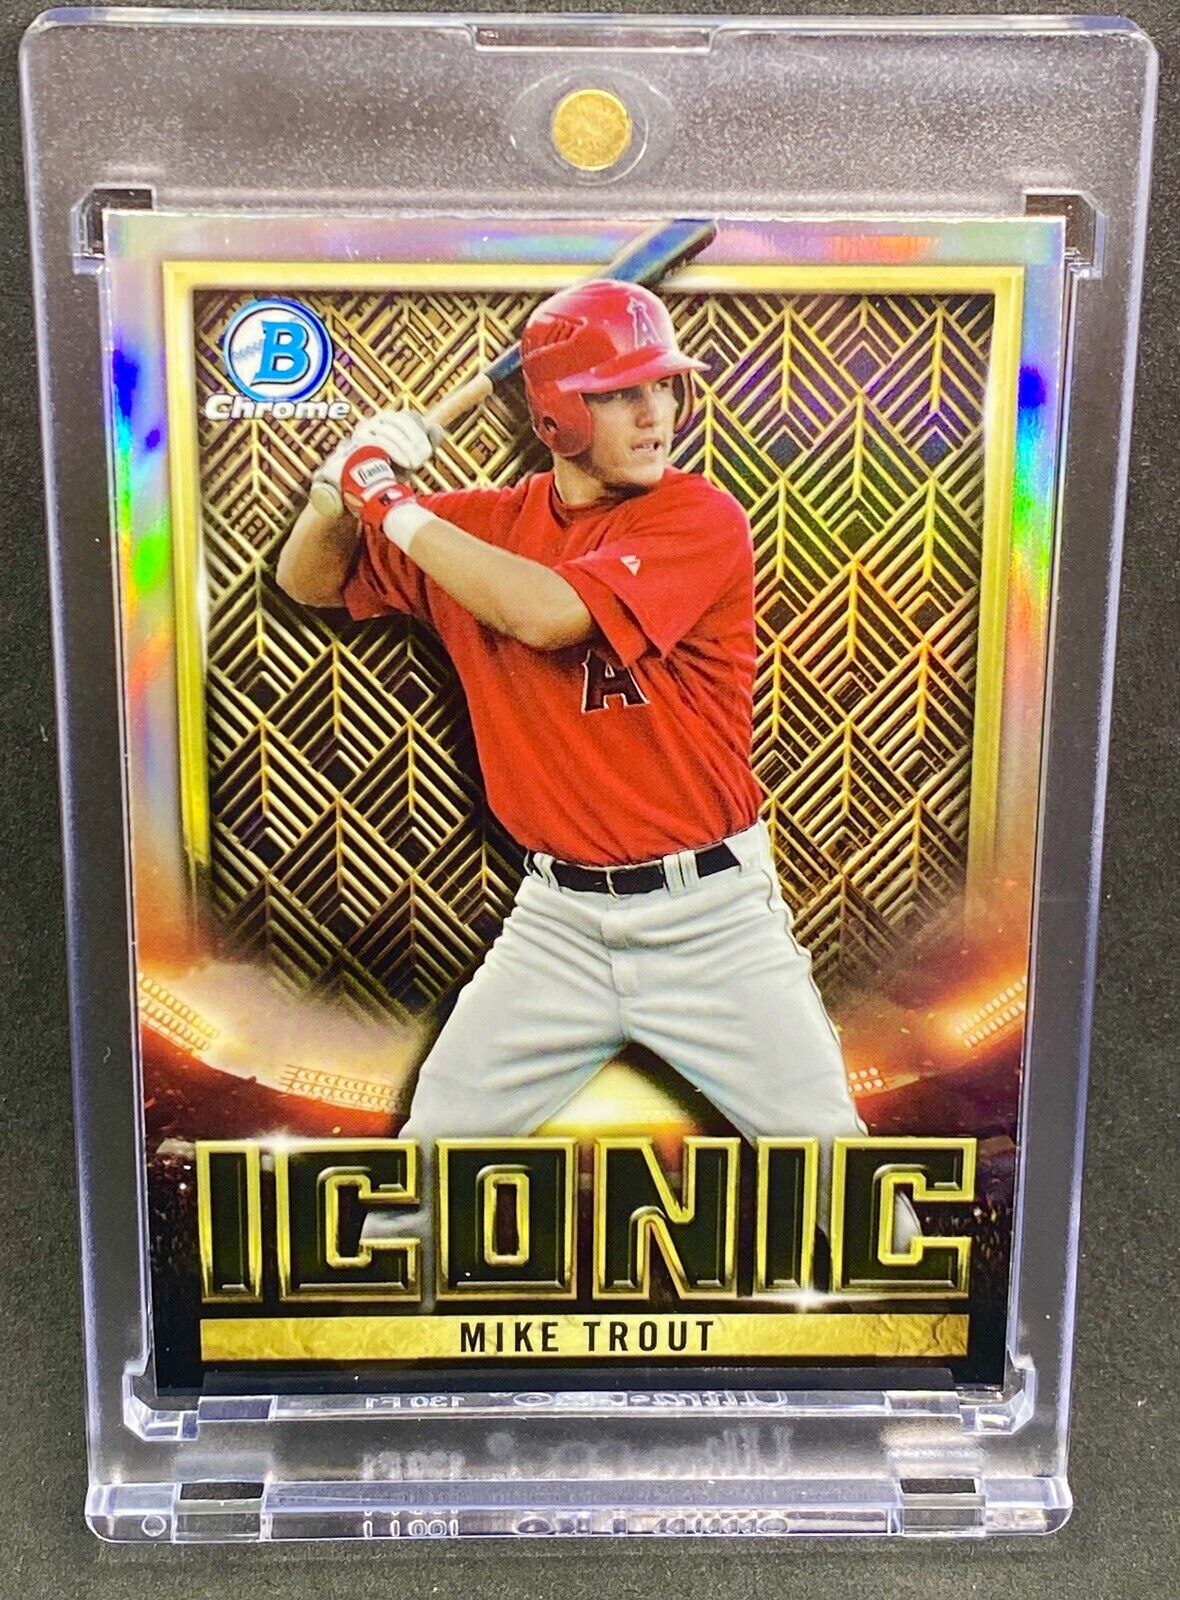 Mike Trout RARE REFRACTOR INVESTMENT CARD SSP BOWMAN CHROME ANGELS MVP MINT